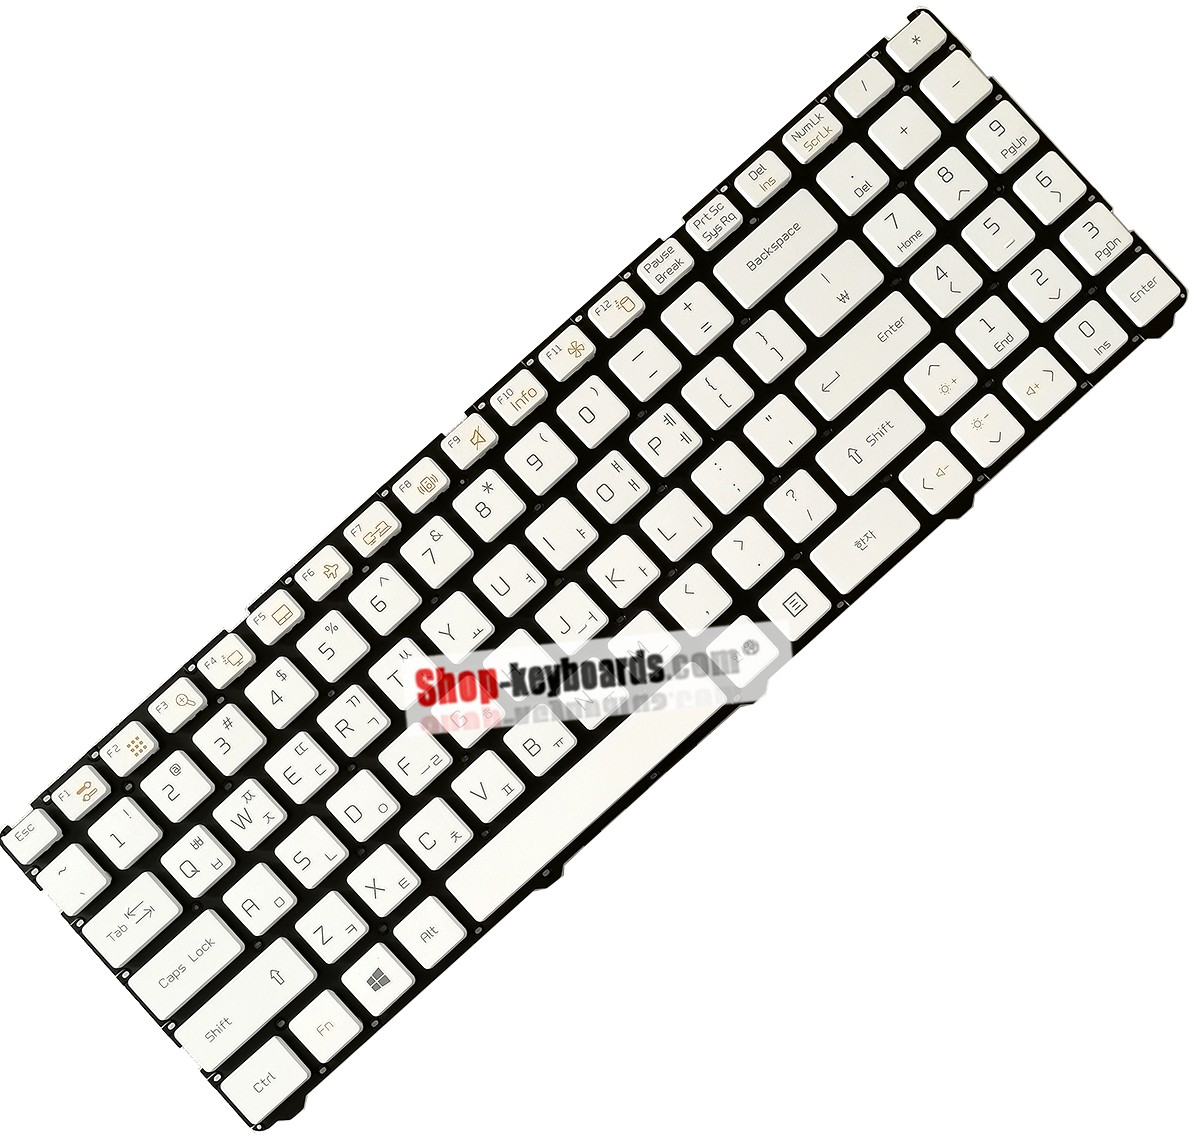 LG MP-12K73F0-9207 Keyboard replacement